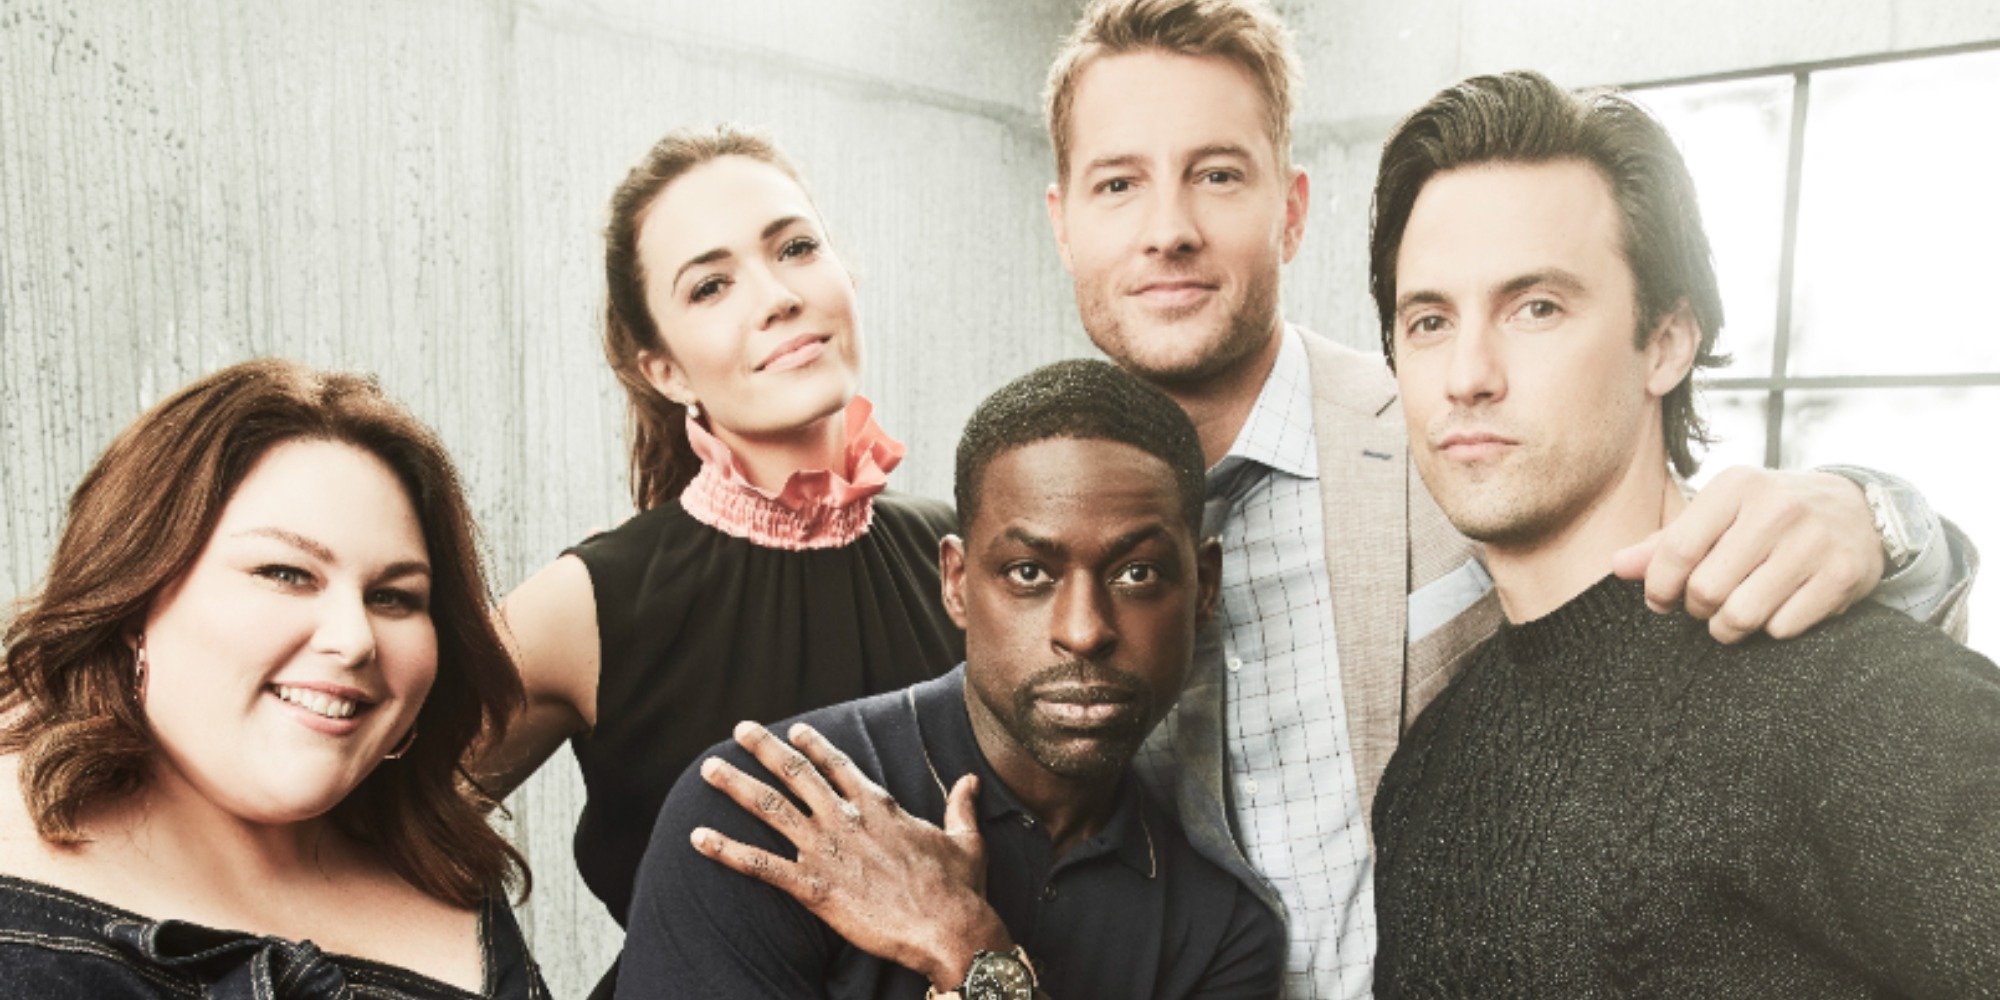 Chrissy Metz, Mandy Moore, Sterling K. Brown, Justin Hartley and Milo Ventimiglia of "This Is Us."